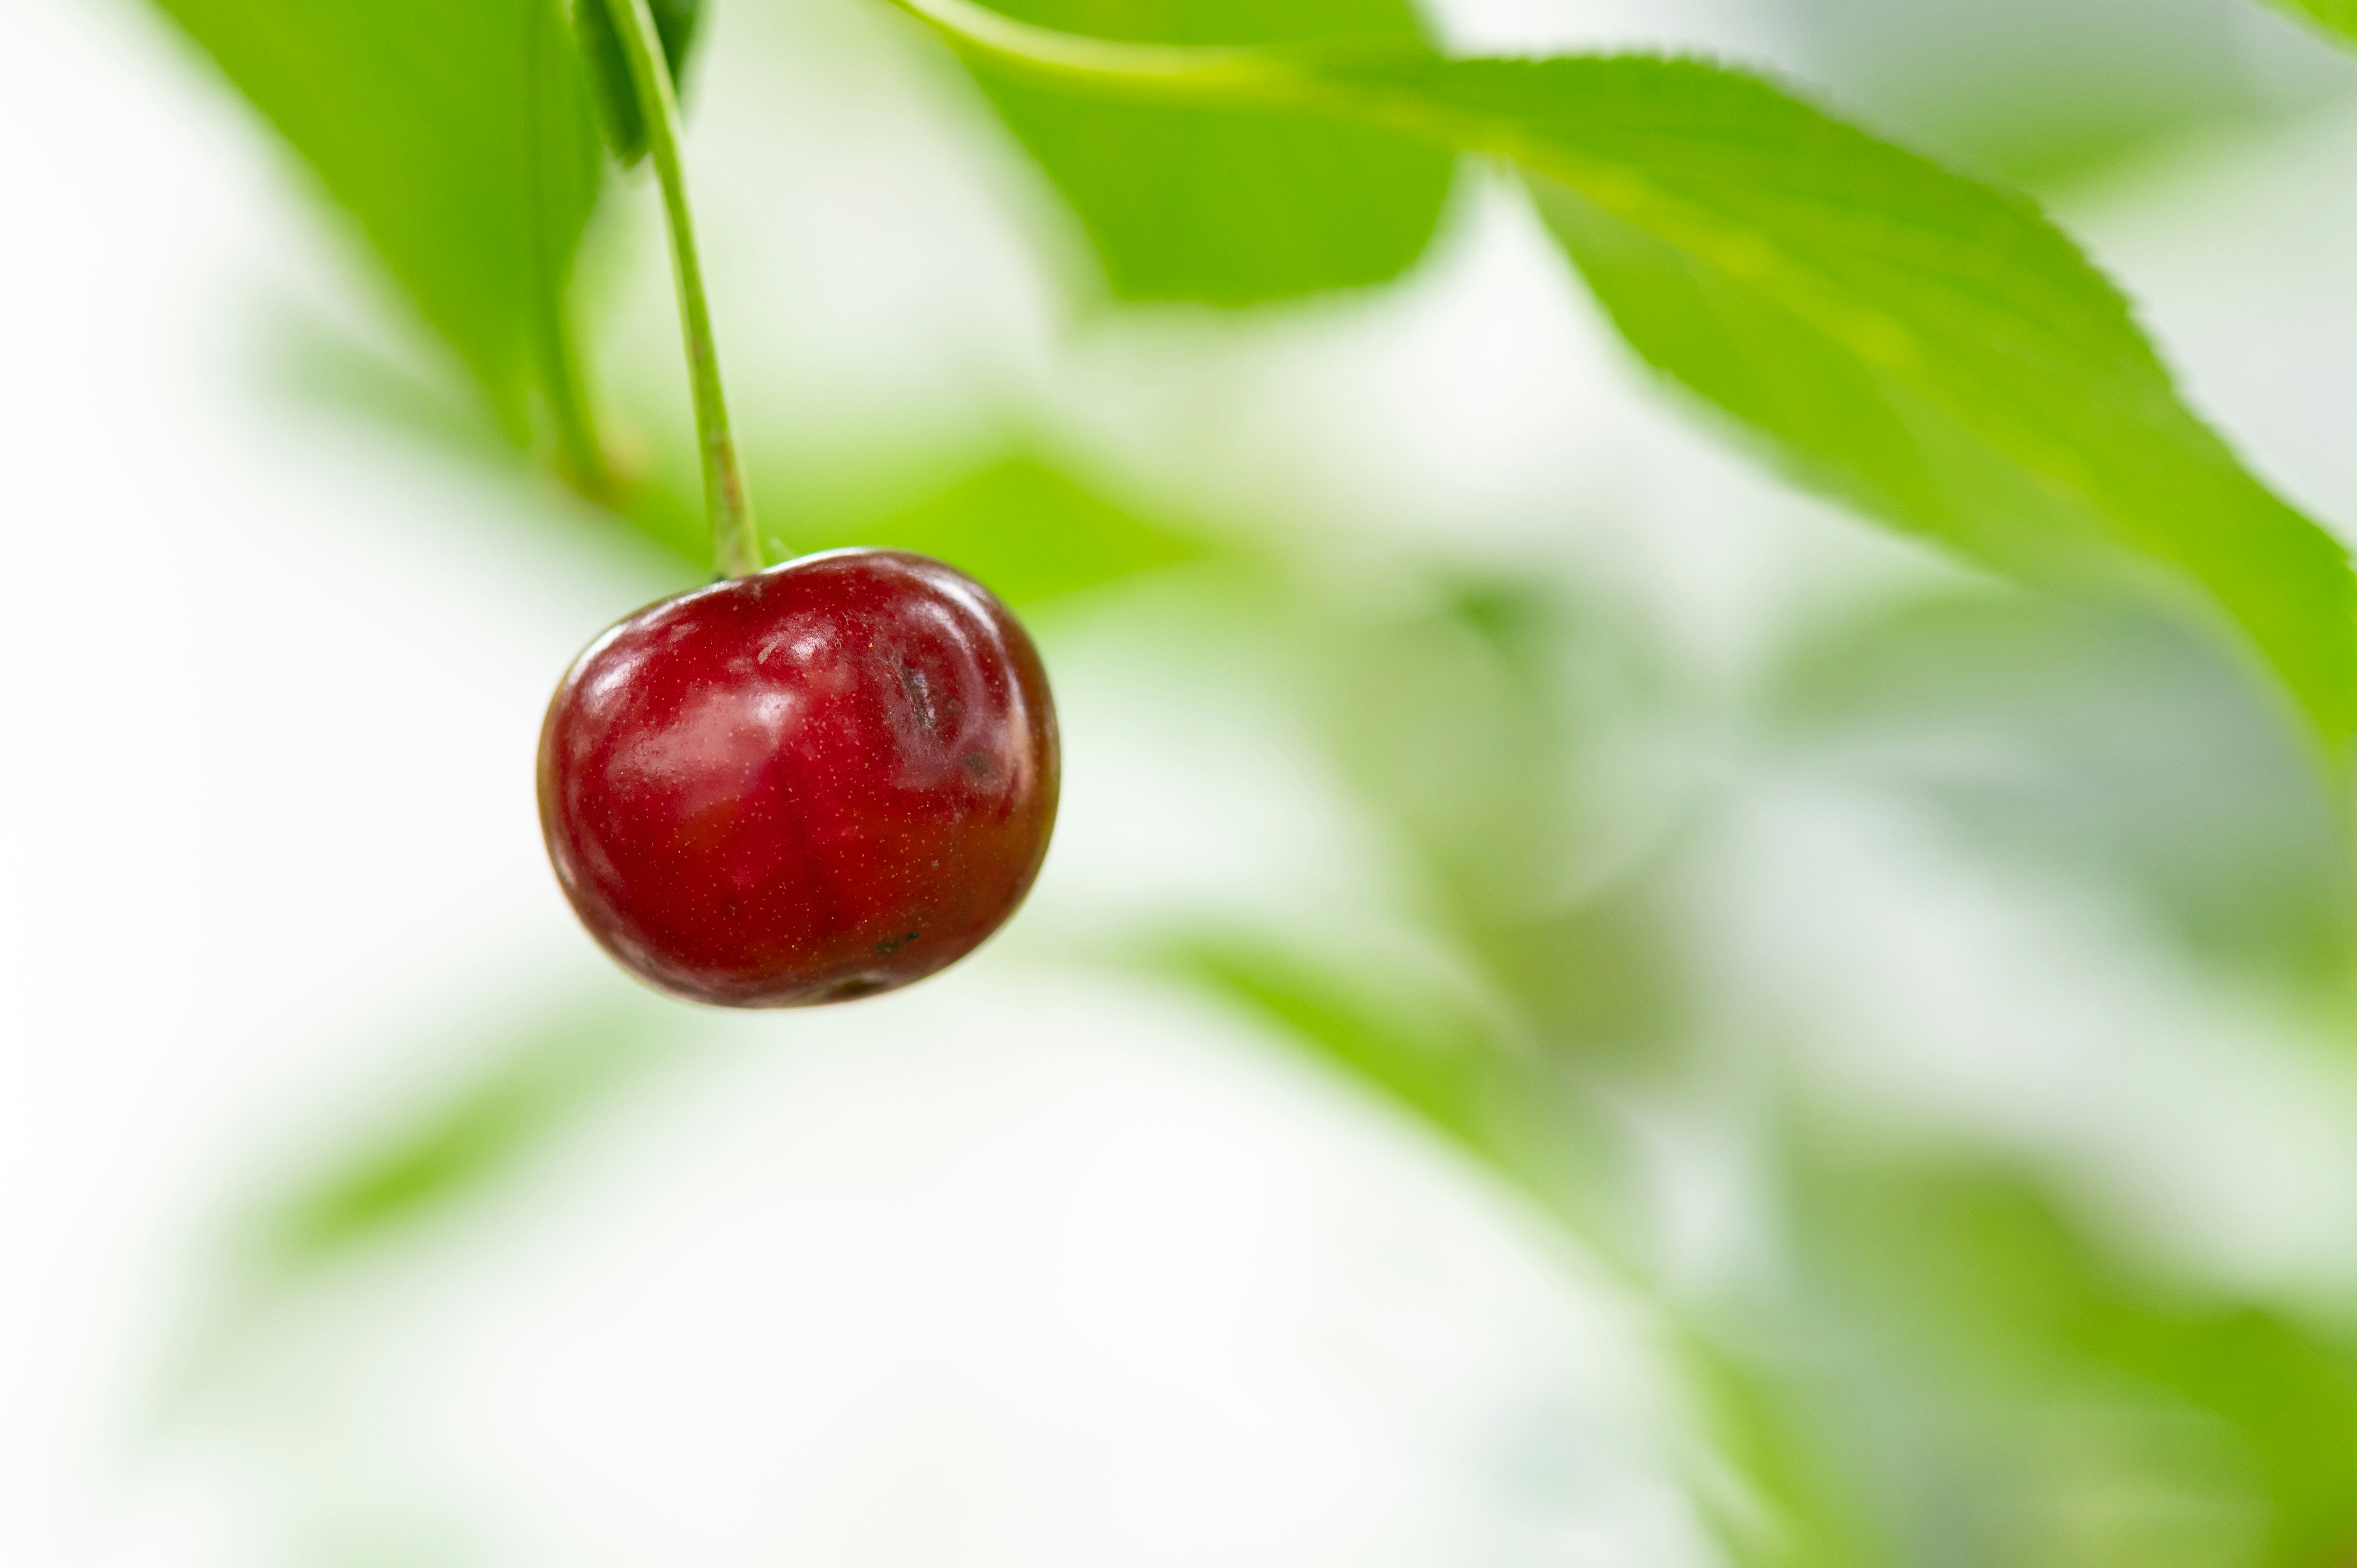 red round fruit on green leaf